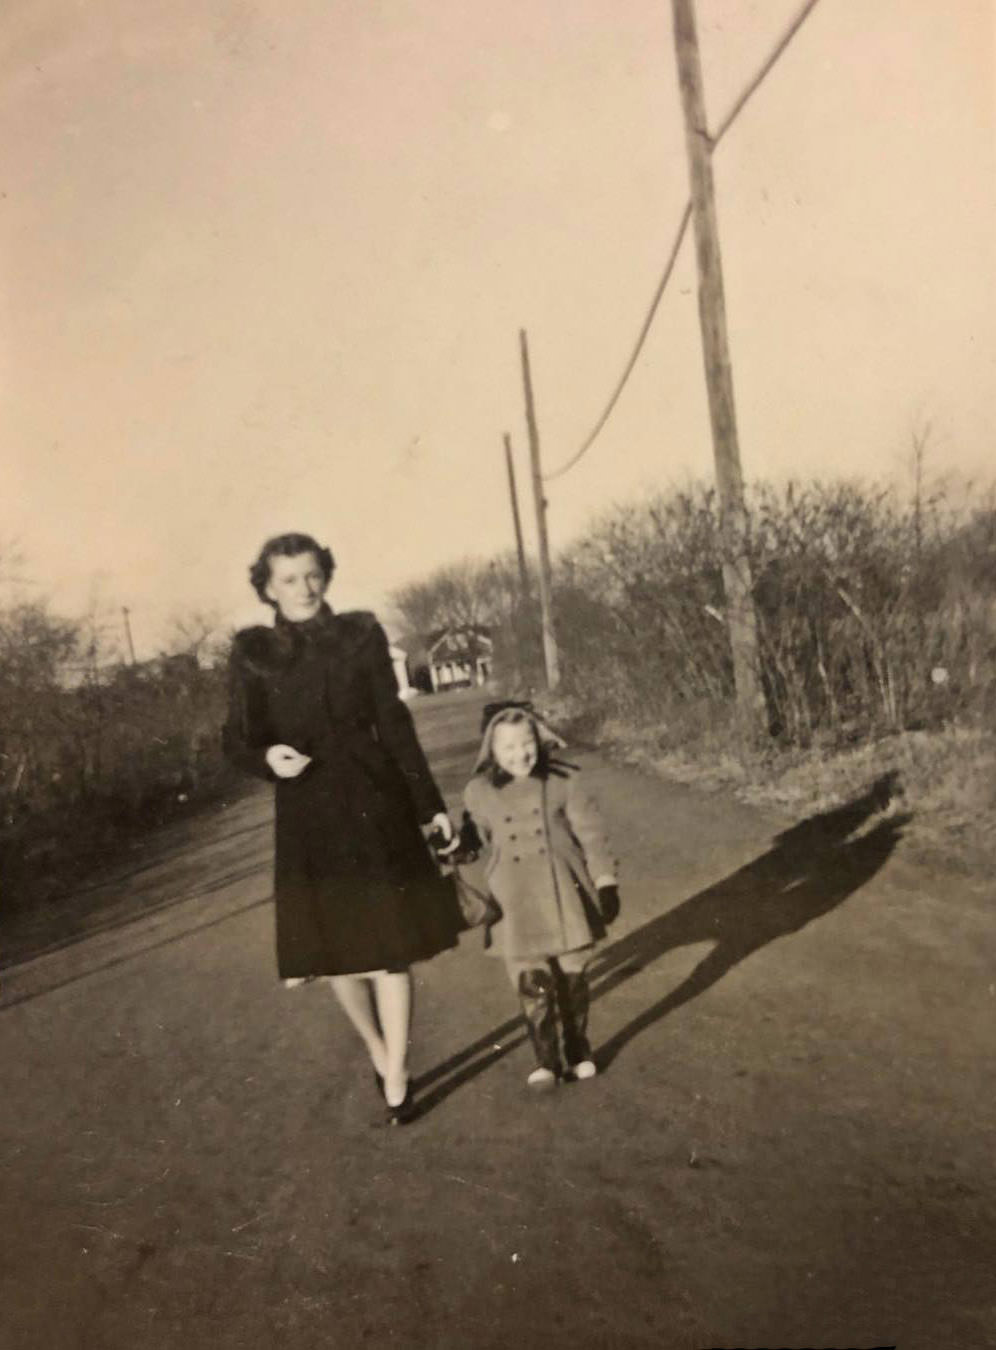 Dongan Hills, Staten Island, Captured In A Nostalgic Photograph Of A Dirt Road And Sparse Houses, Showing A Rural Side Of The City Around 1953, 1953.